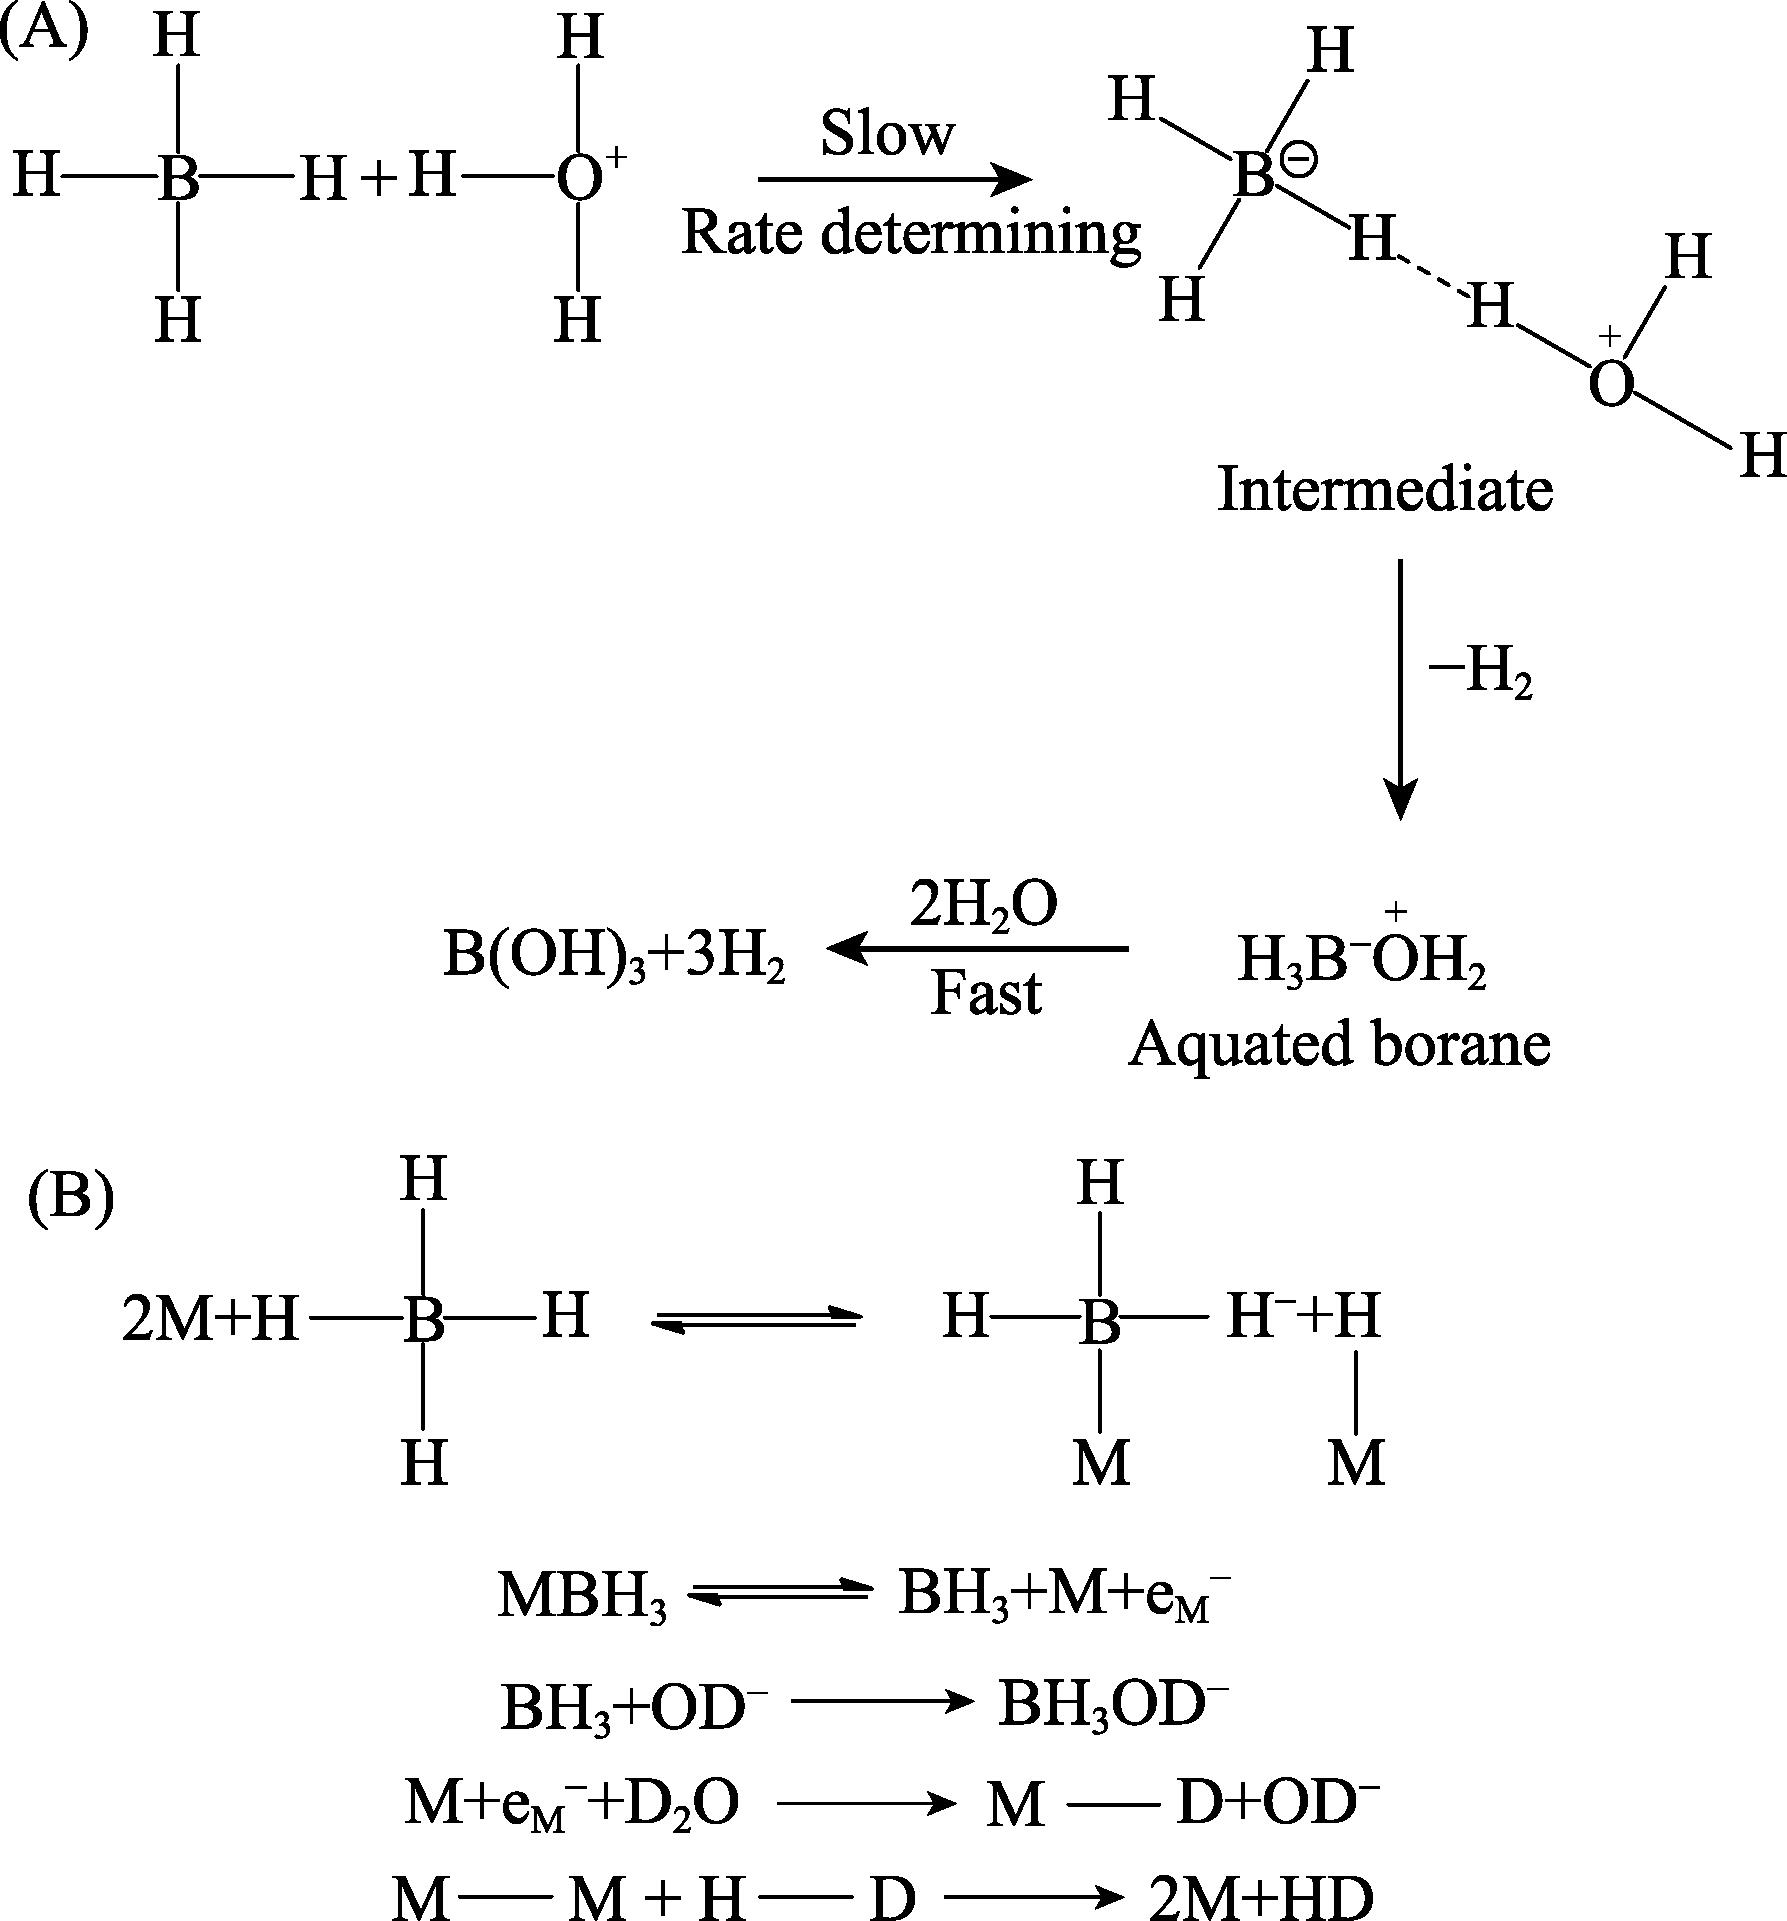 Schemes for the mechanisms of homogeneous (A) and heterogeneous (B) hydrolysis of NaBH4[13]